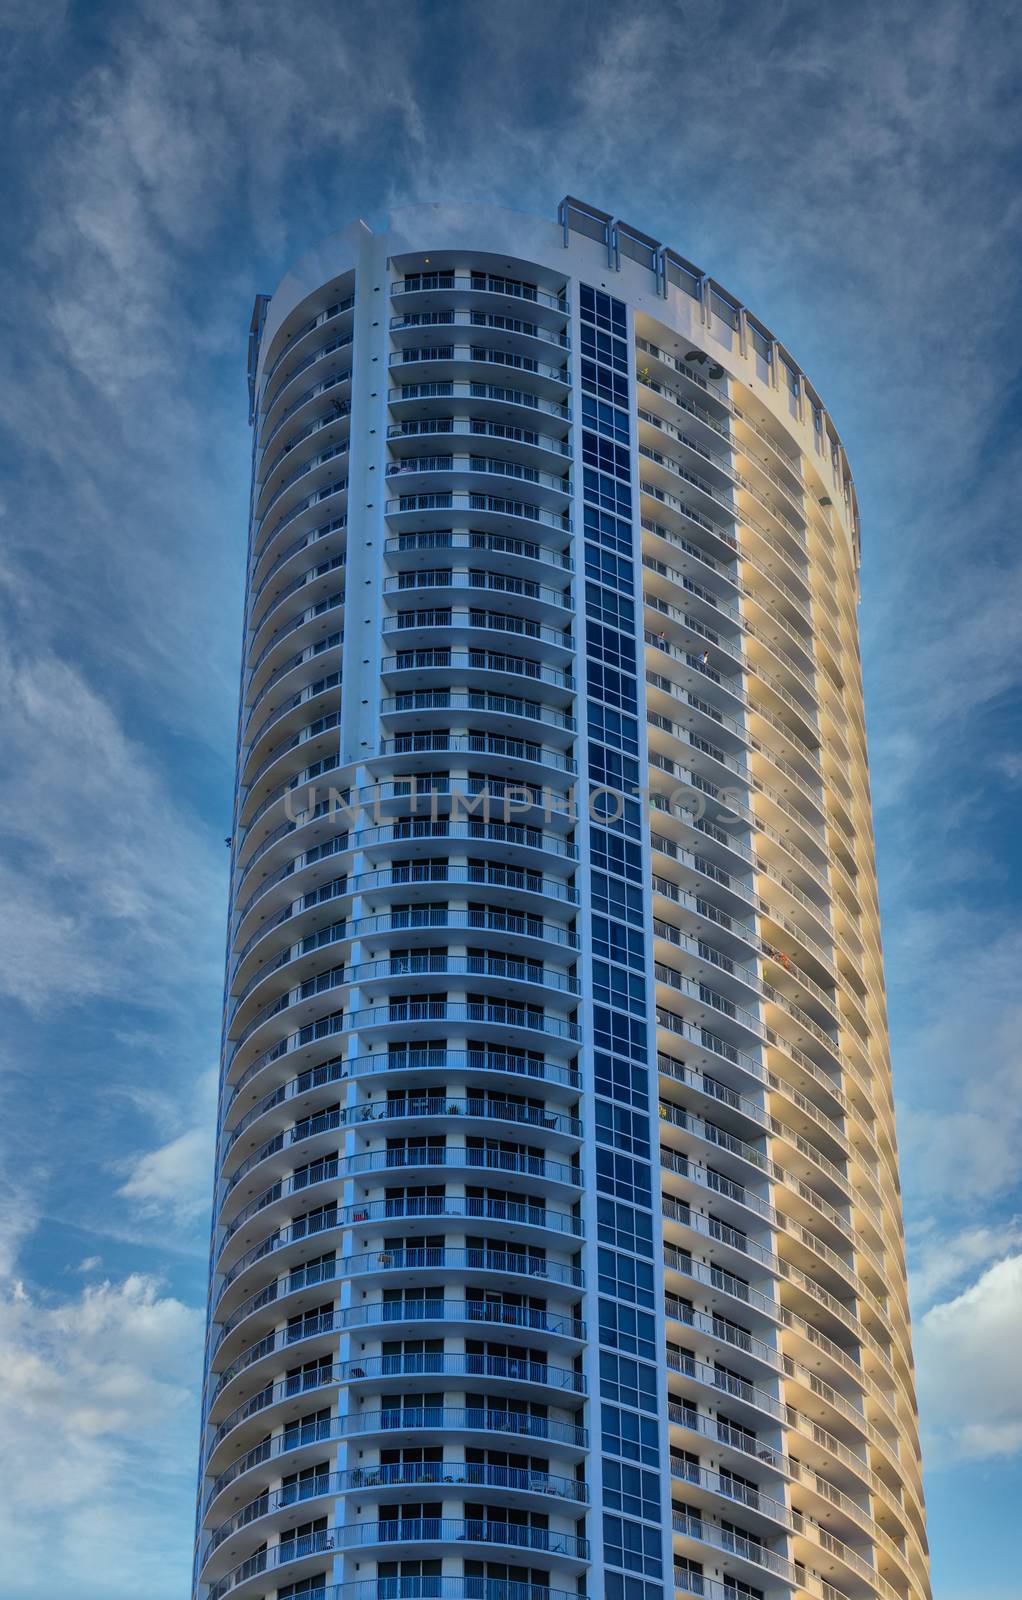 Many Curved Balconies on Miami Tower Hotel